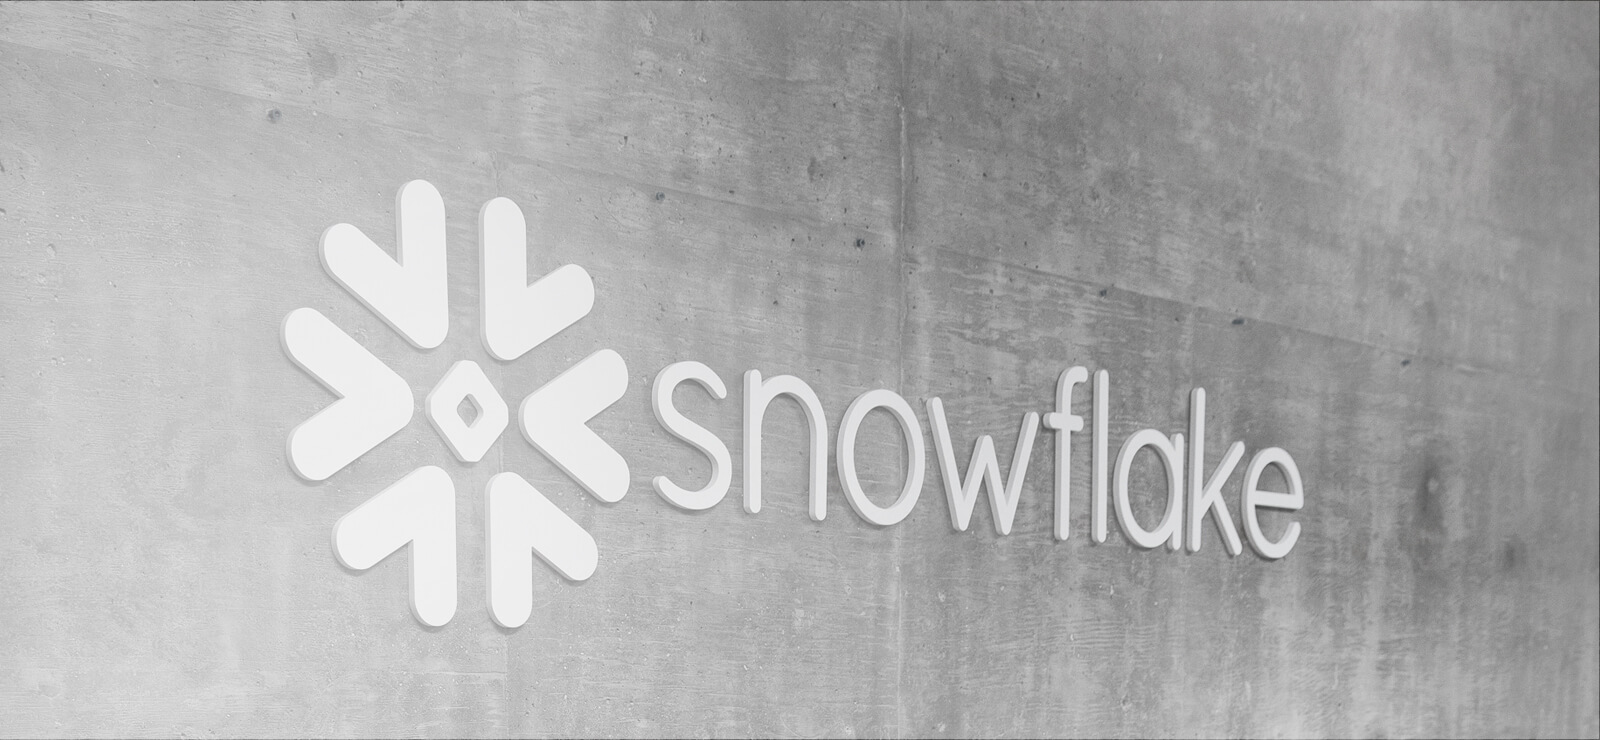 Snowflake’s Product Innovations for 2020